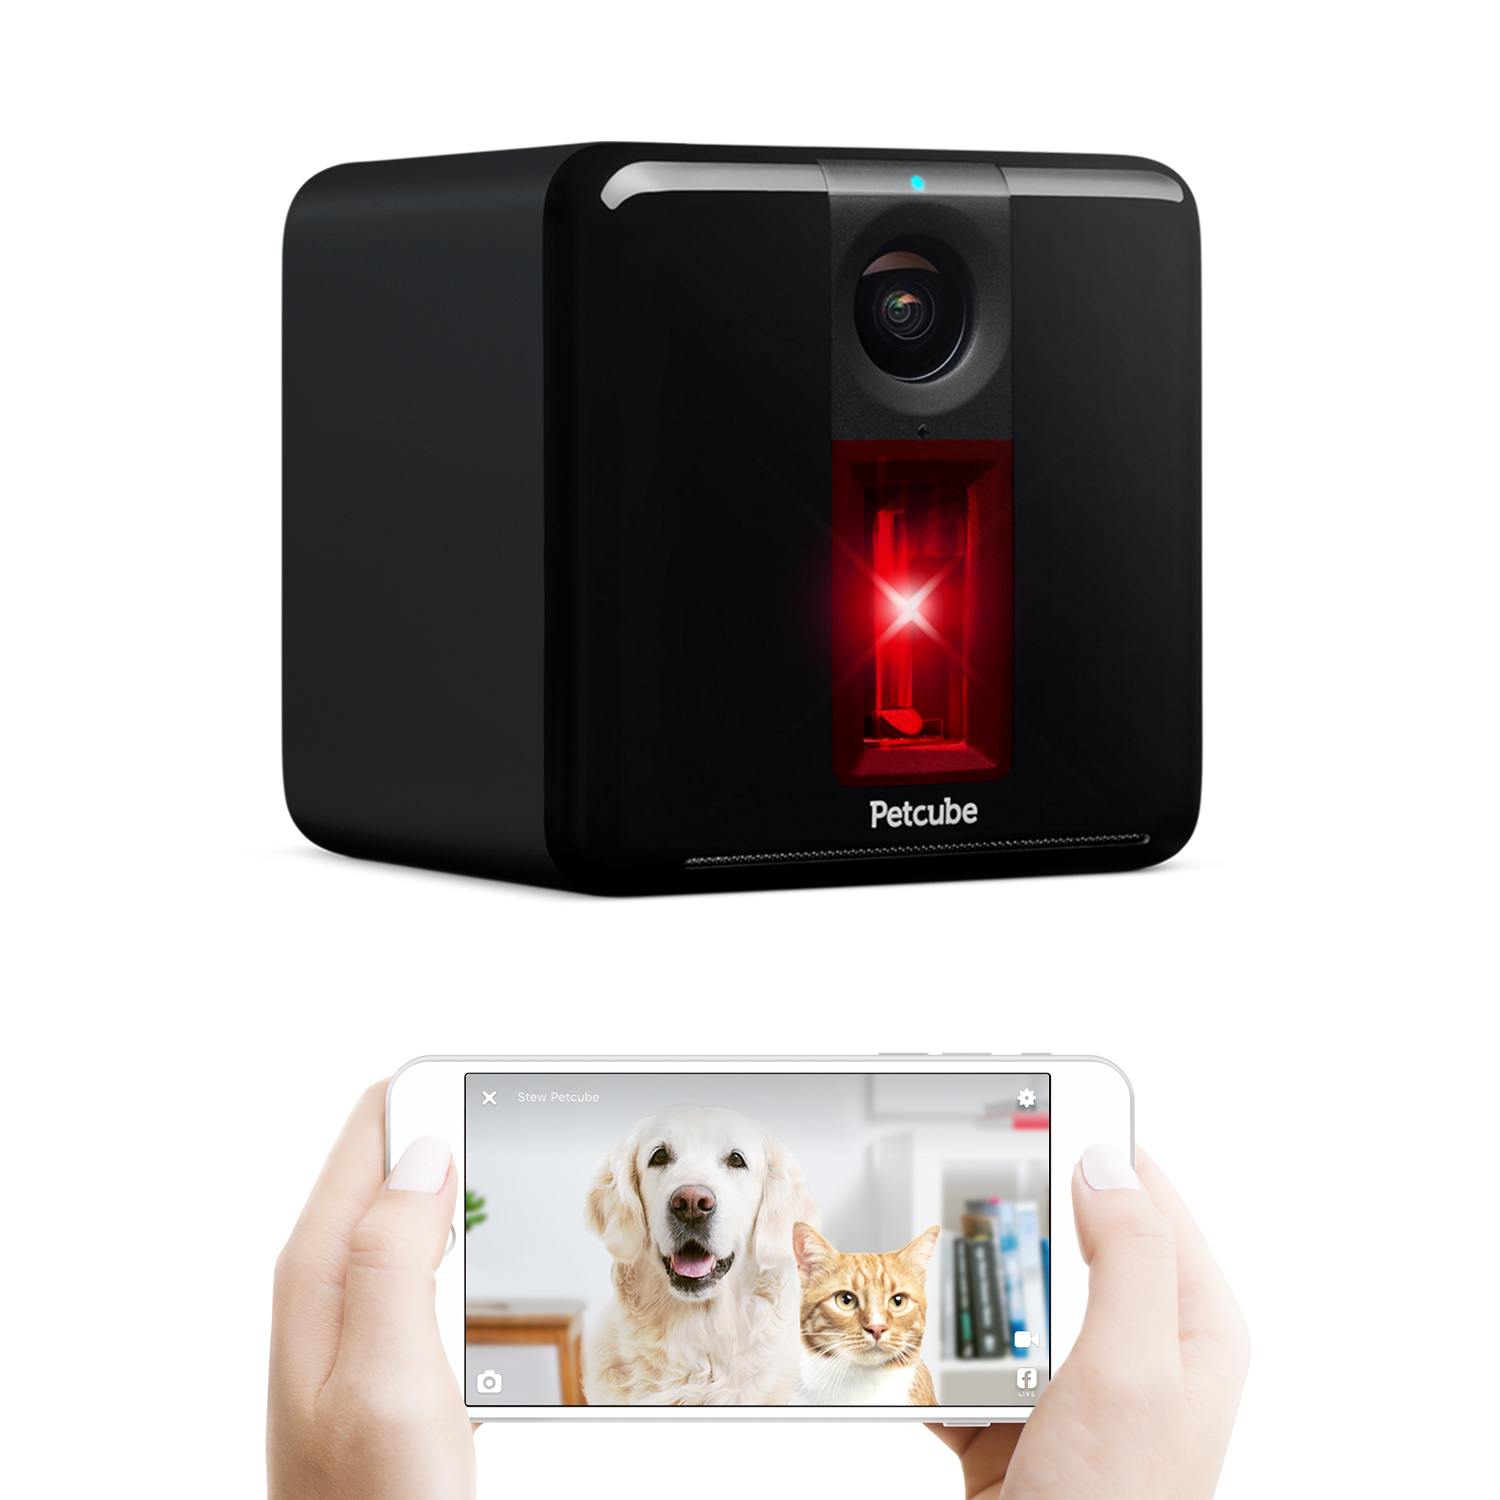 Petcube Play Interactive Dog Camera with Laser, Carbon Black - image 2 of 13